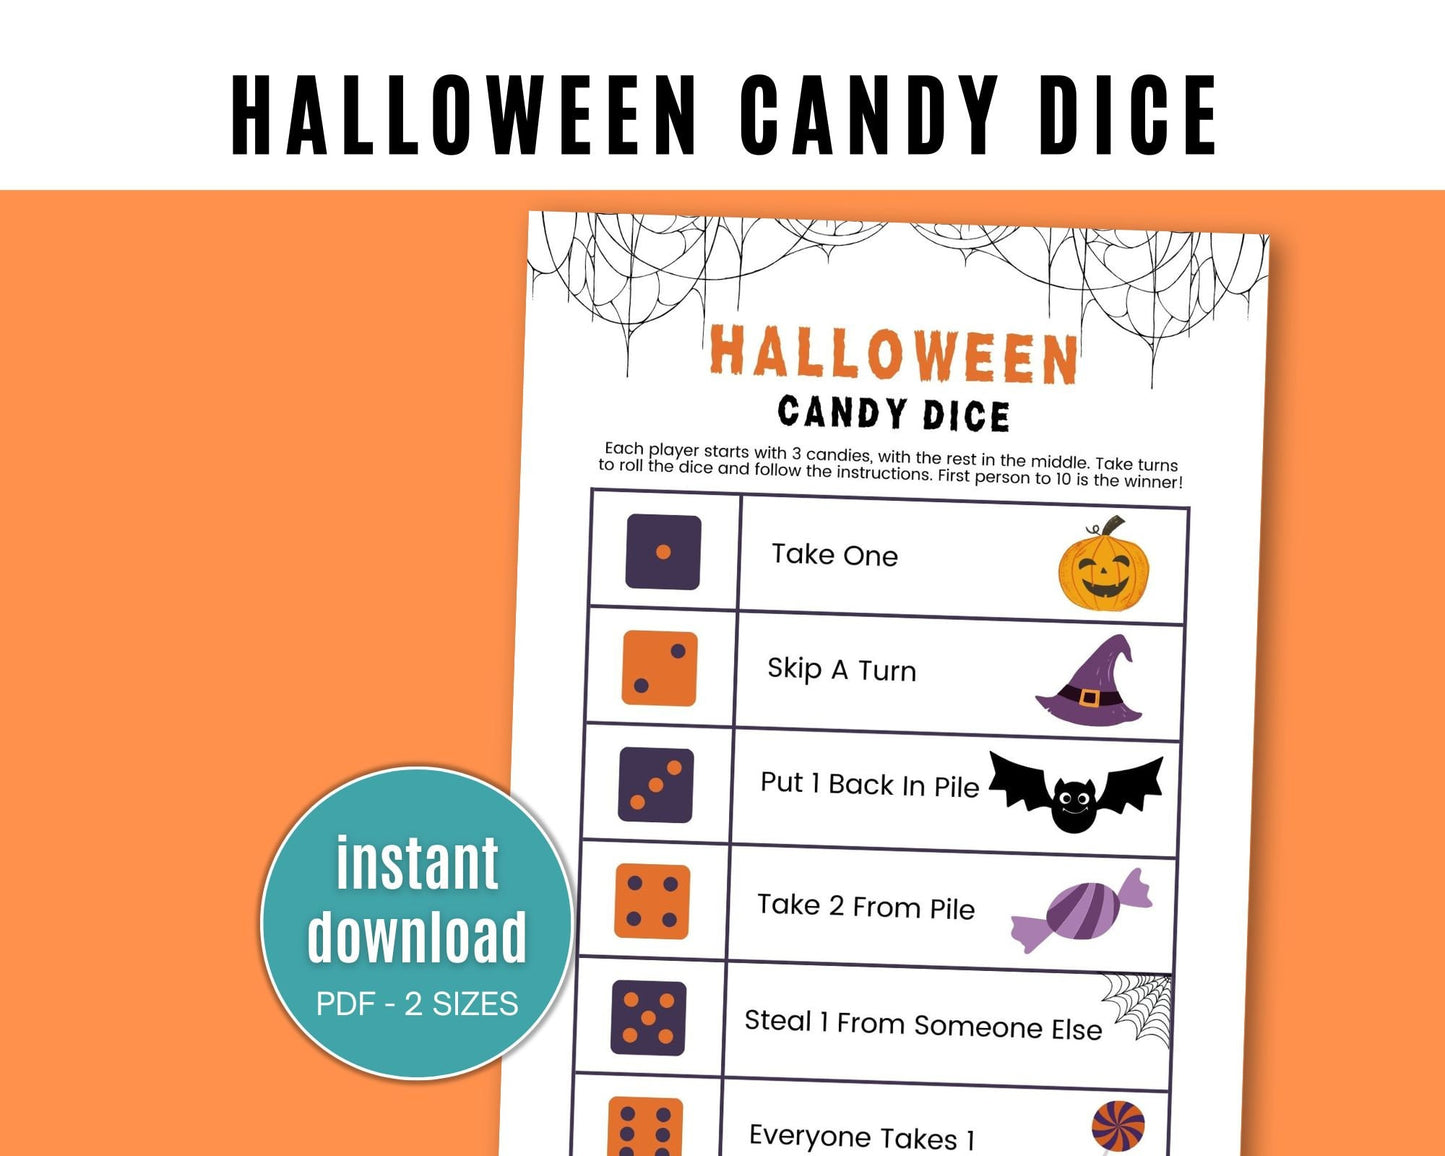 Halloween Candy Dice Game - Simplify Create Inspire